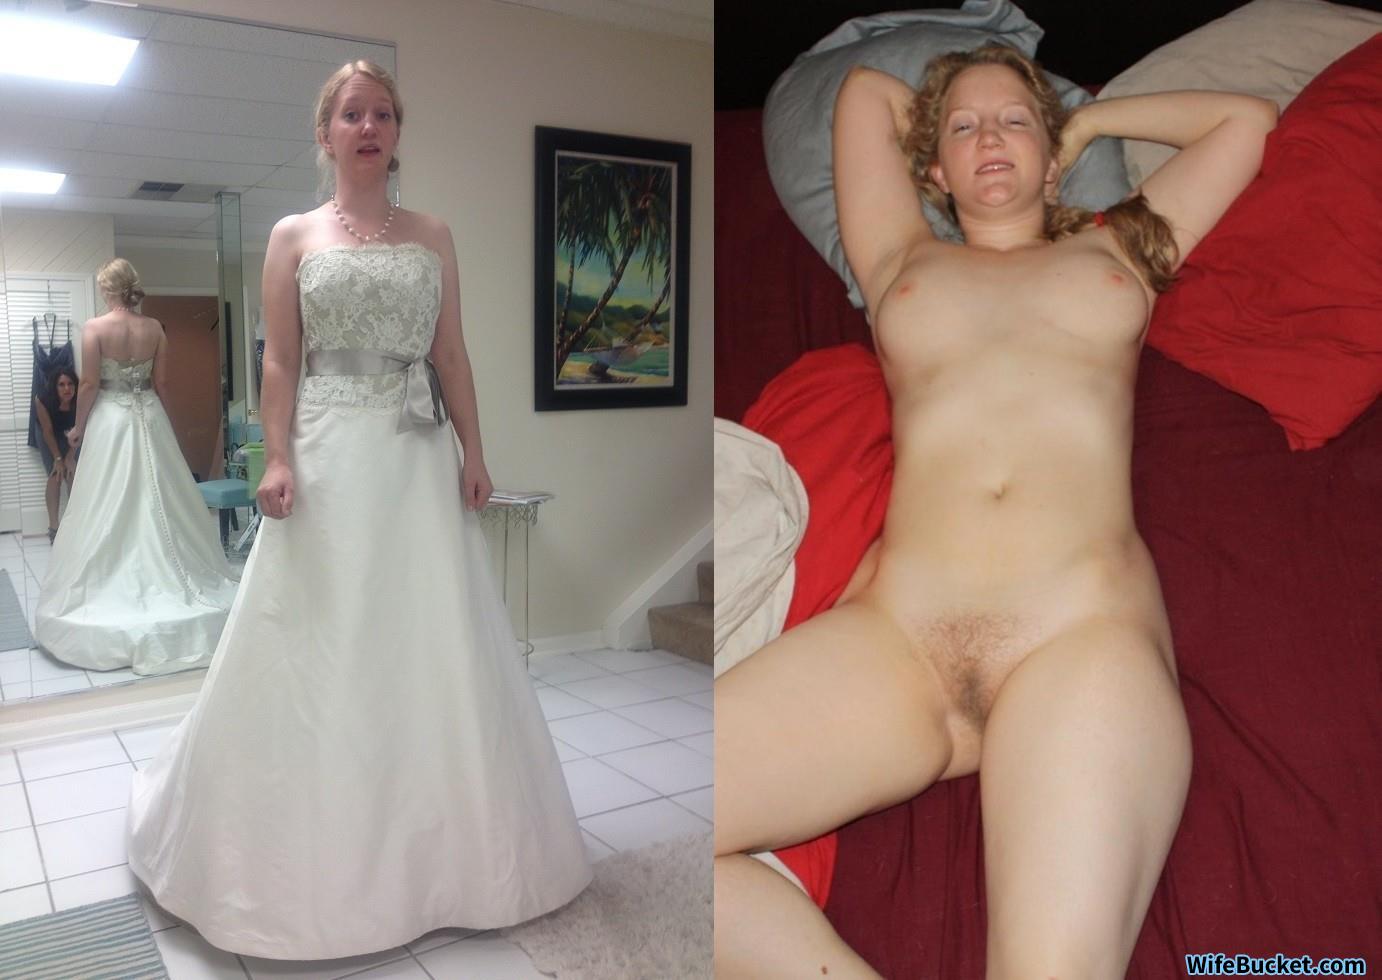 Fat Bride Pussy - Before-after sex pics â€“ WifeBucket | Offical MILF Blog